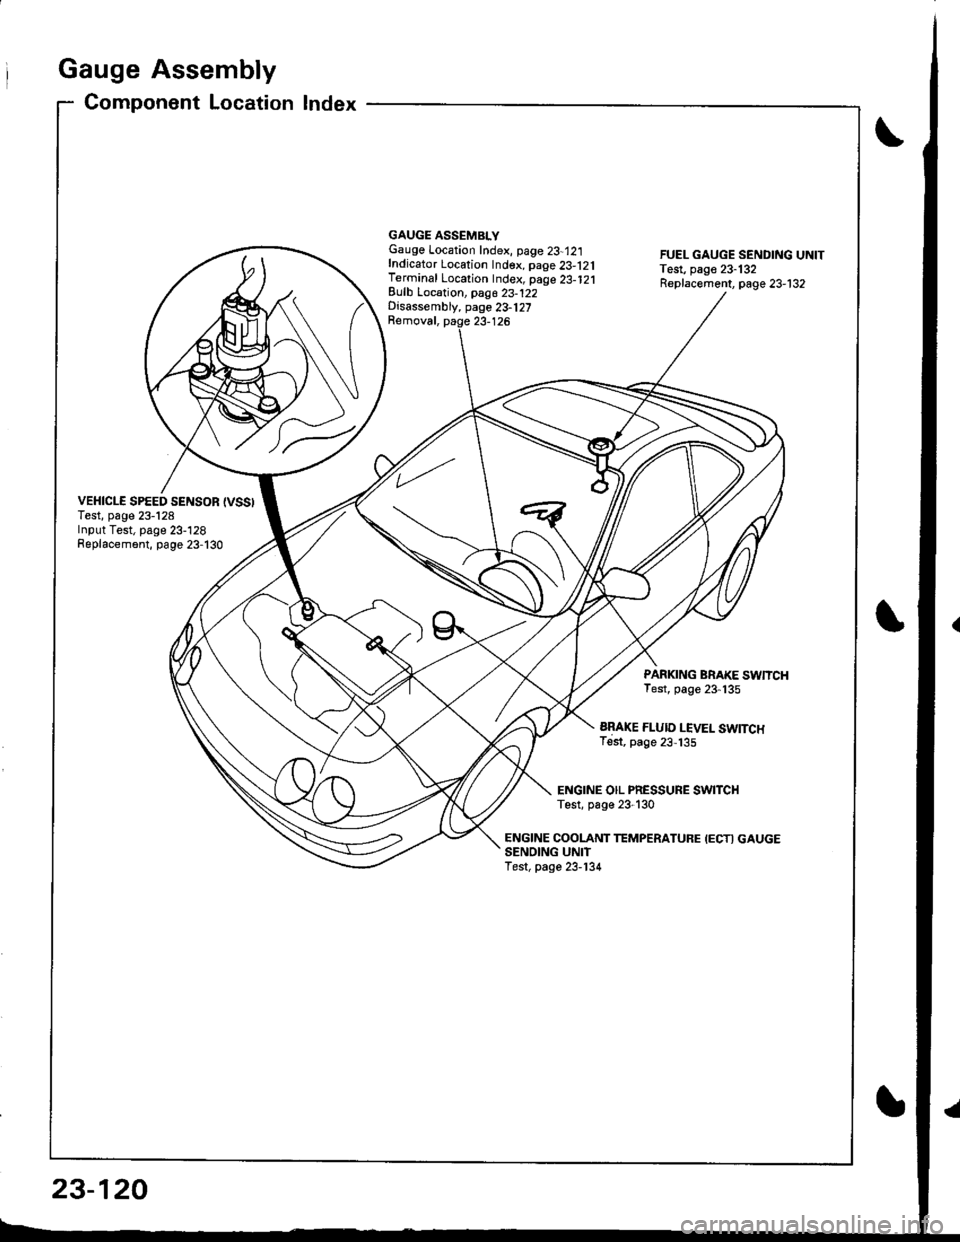 HONDA INTEGRA 1998 4.G Owners Manual Gauge Assembly
Component Location Index
VEHICLE SPEED SENSOR {VSSITest, page 23-128Input Test, page 23-128Replacement, page 23-130
GAUGE ASSEMBLYGauge Location Index, page 23-12:|fndicator Location In